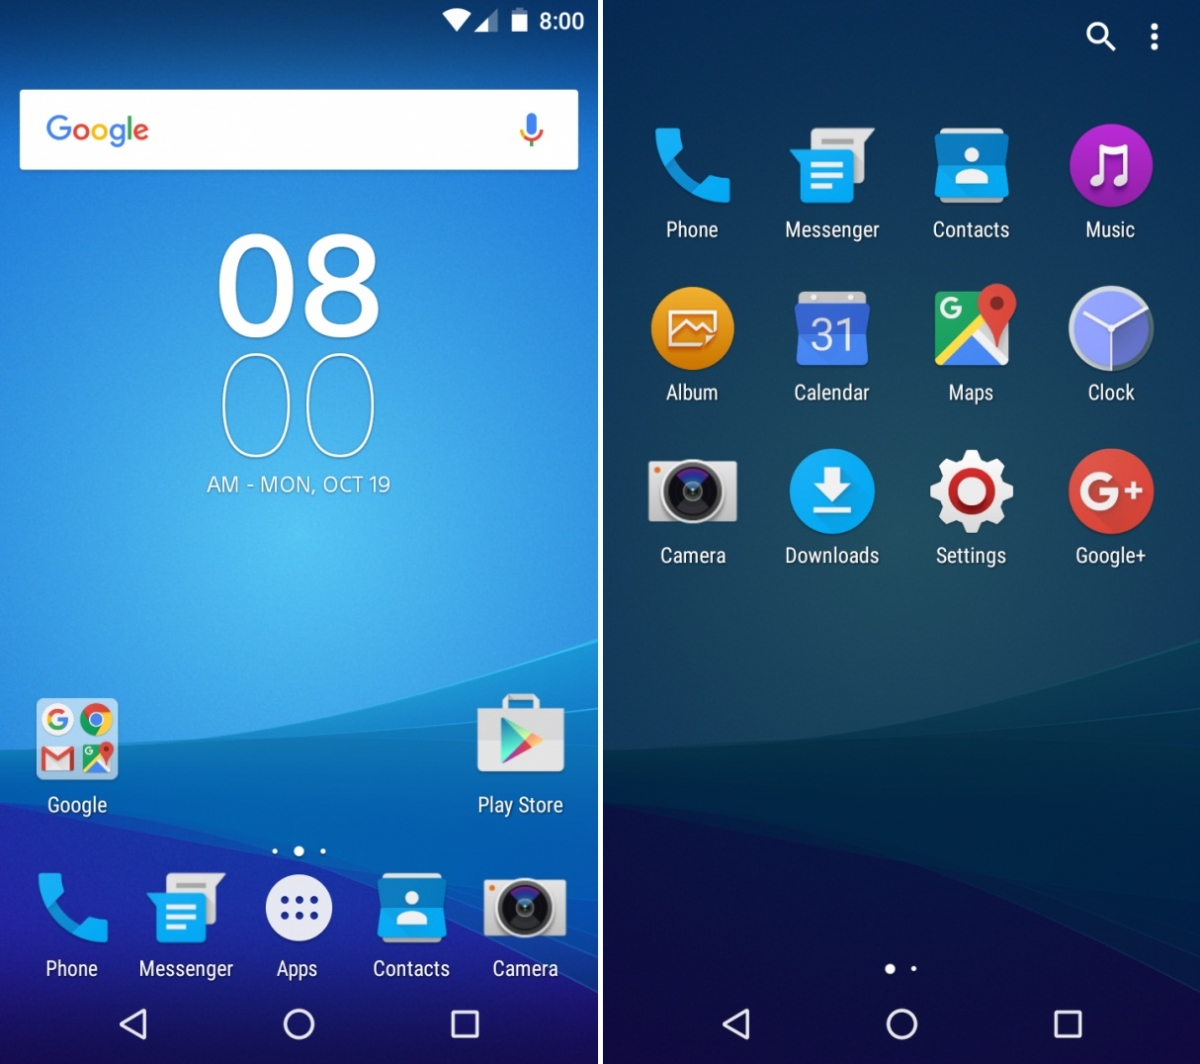 Android 6 0 Marshmallow Test Build Starts Rolling Out For Sony Xperia Z3 And Xperia Z3 Compact